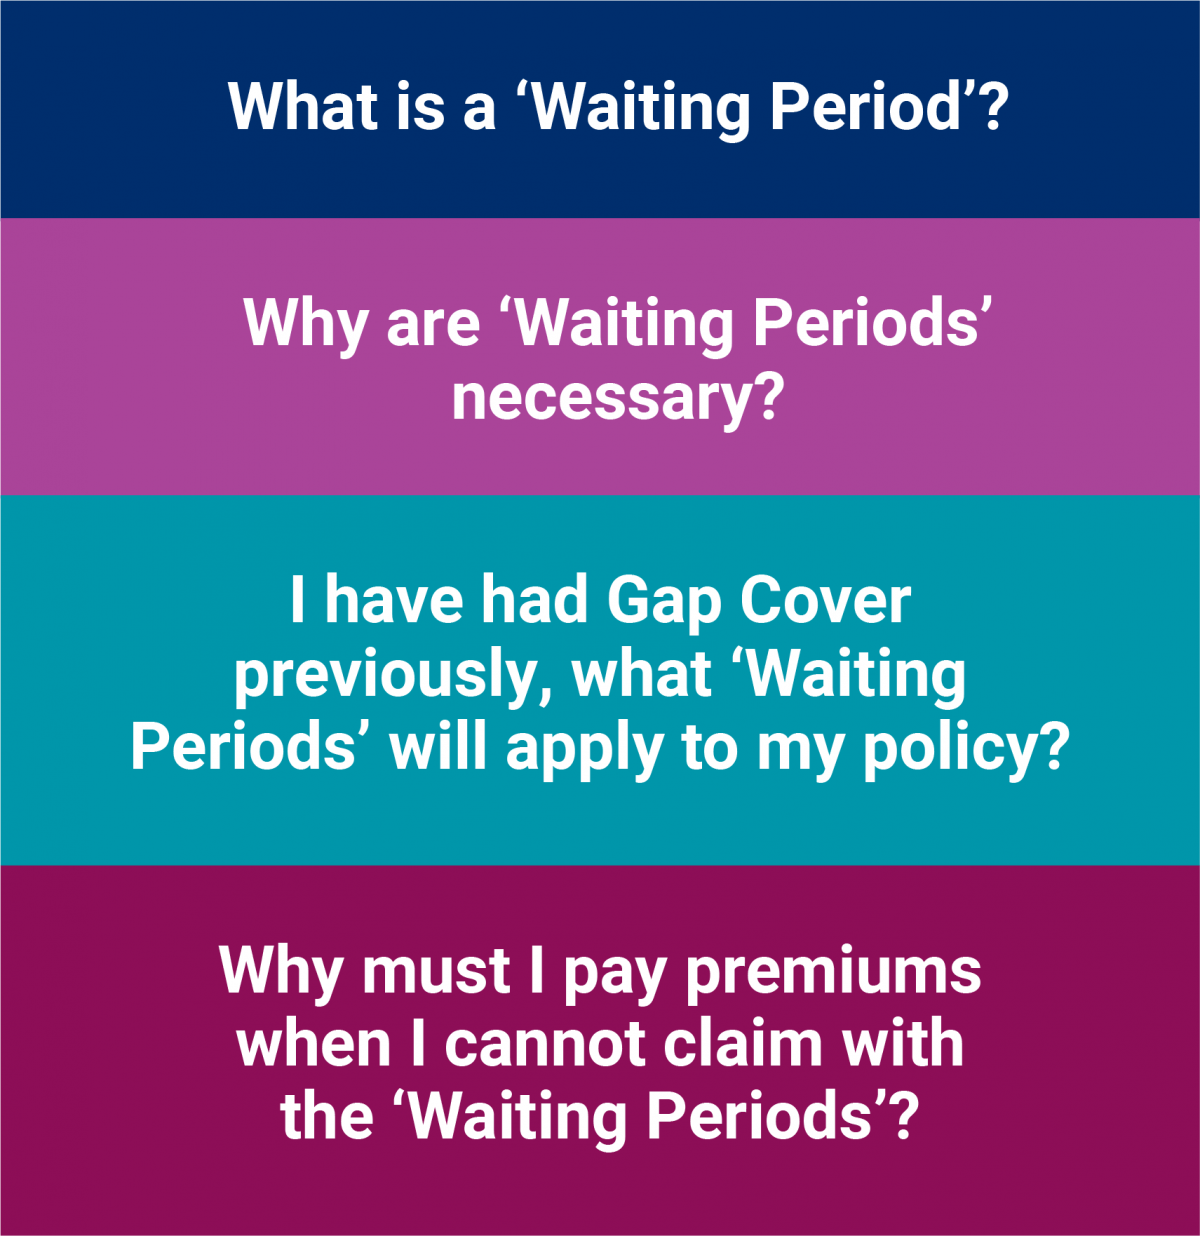 What is a waiting period?